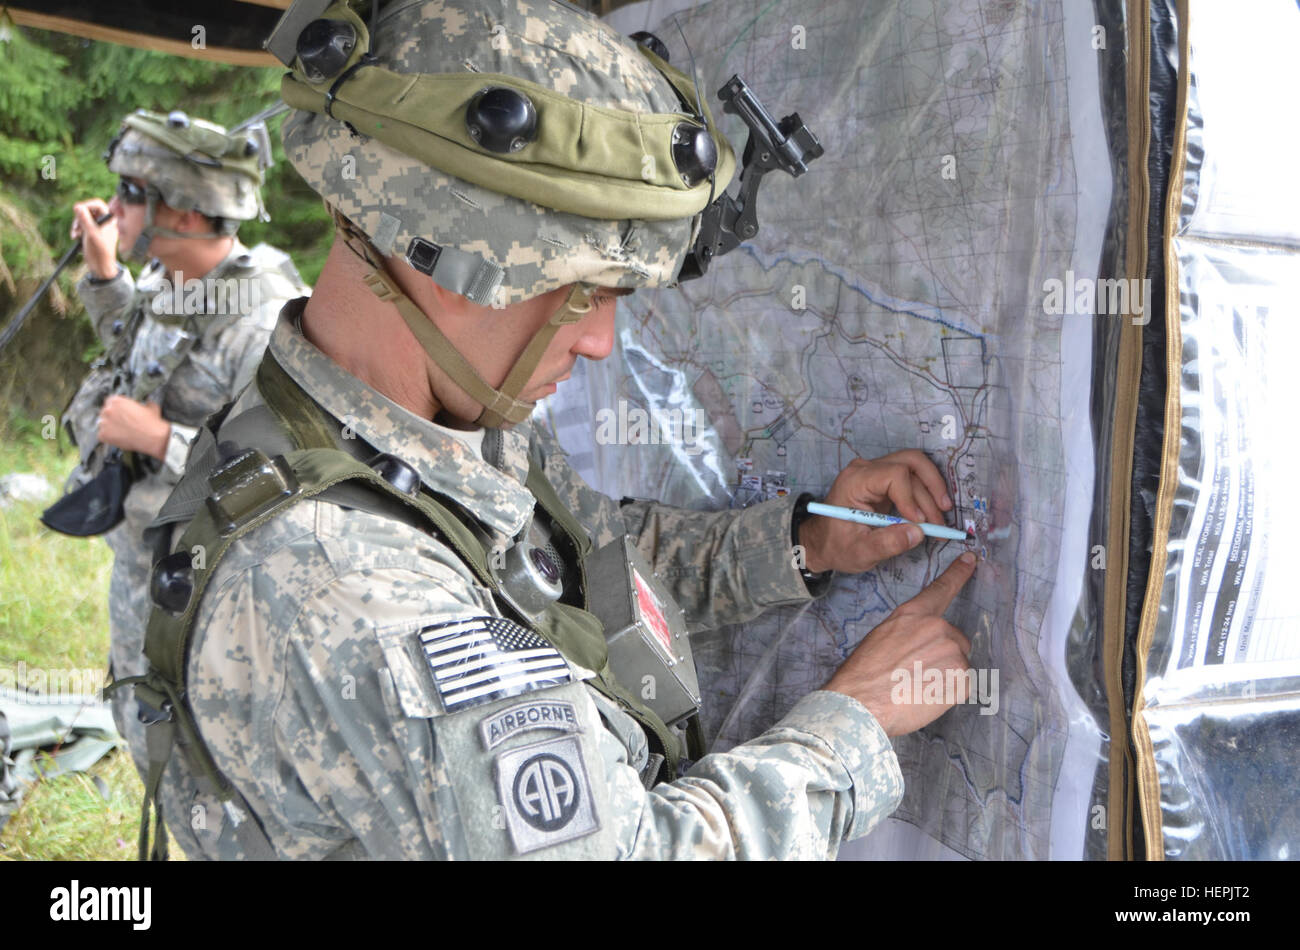 A U.S. Soldier of Brigade Headquarters and Headquarters Company, 1st Infantry Brigade, 82nd Airborne Division, notes a location on a map while working in a tactical operations center during exercise Swift Response 15 at the U.S. Army’s Joint Multinational Readiness Center in Hohenfels, Germany, Aug. 27, 2015. The purpose of the exercise is to conduct joint and combined training events in order to evaluate brigade and battalion level execution of strategic out-load in conjunction with allied partner nations through an intermediate staging base. Swift Response 15 is the U.S. Army’s largest combi Stock Photo